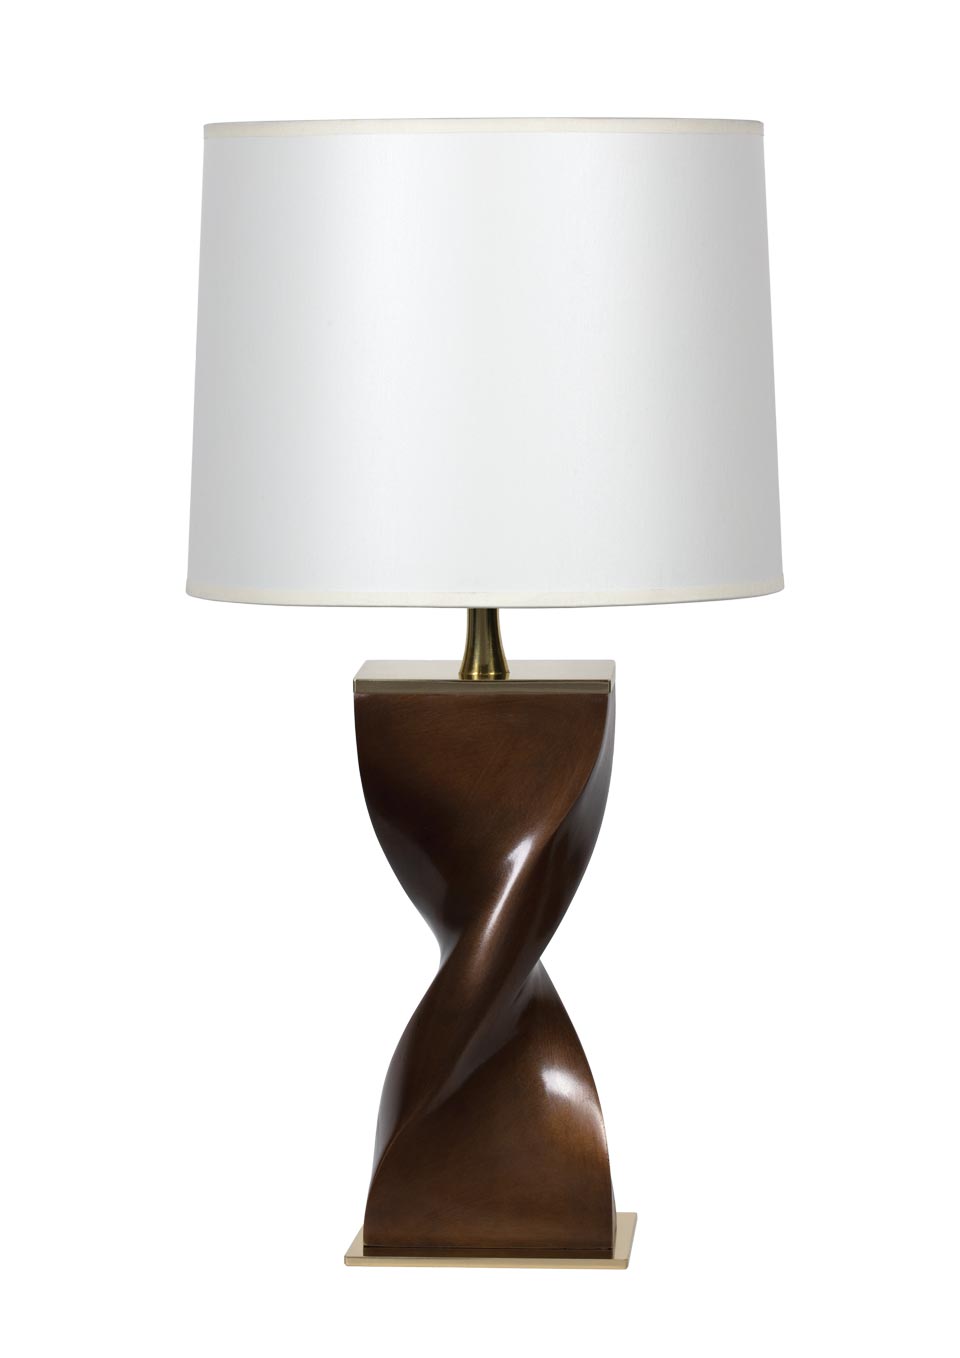 Helico table lamp with bronze twist foot. Ateliers&Torsades. 